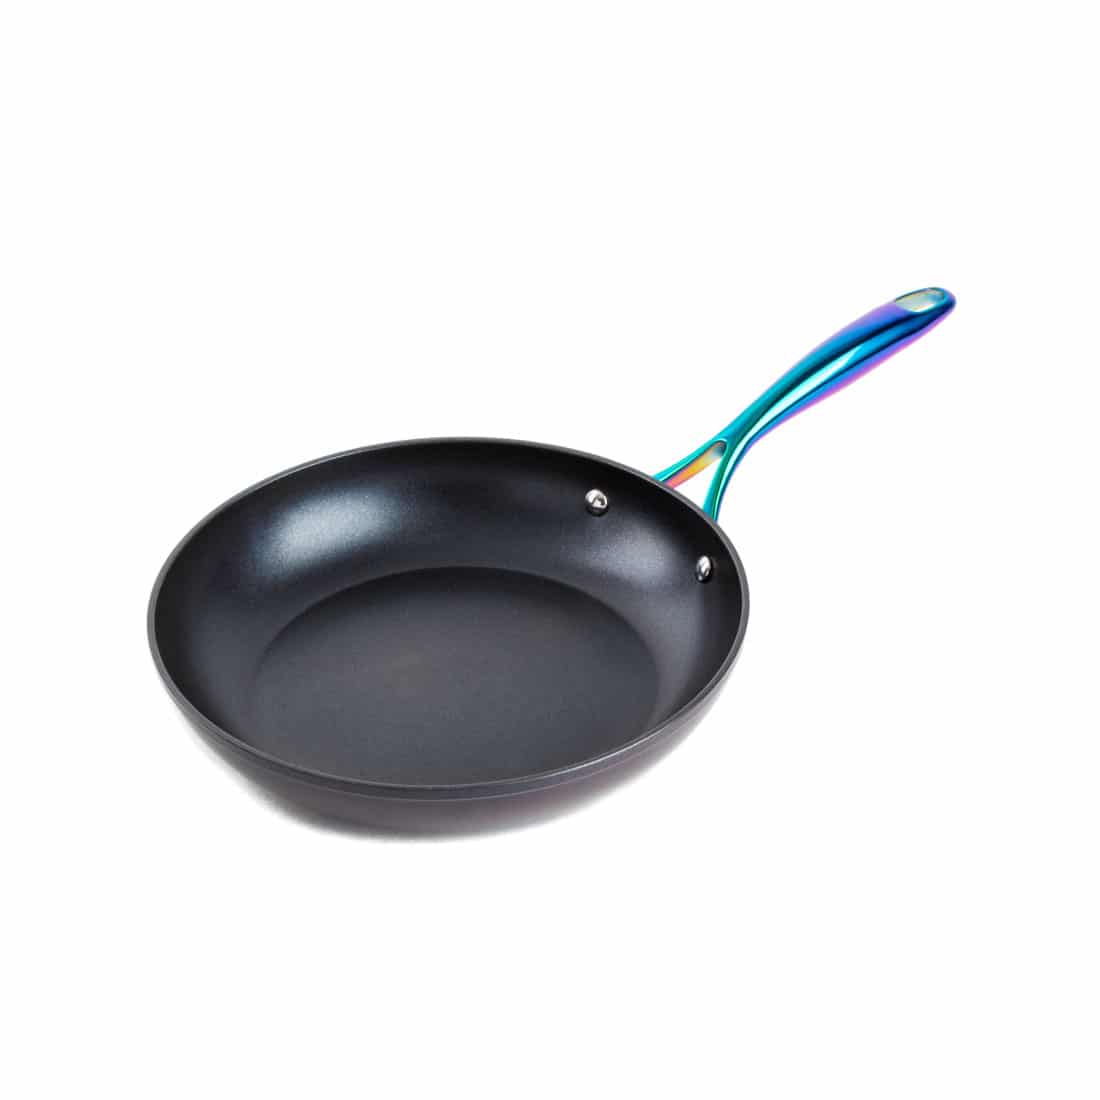 https://explorethymeandtable.com/wp-content/uploads/2021/02/rainbow-10in-frypan.jpg